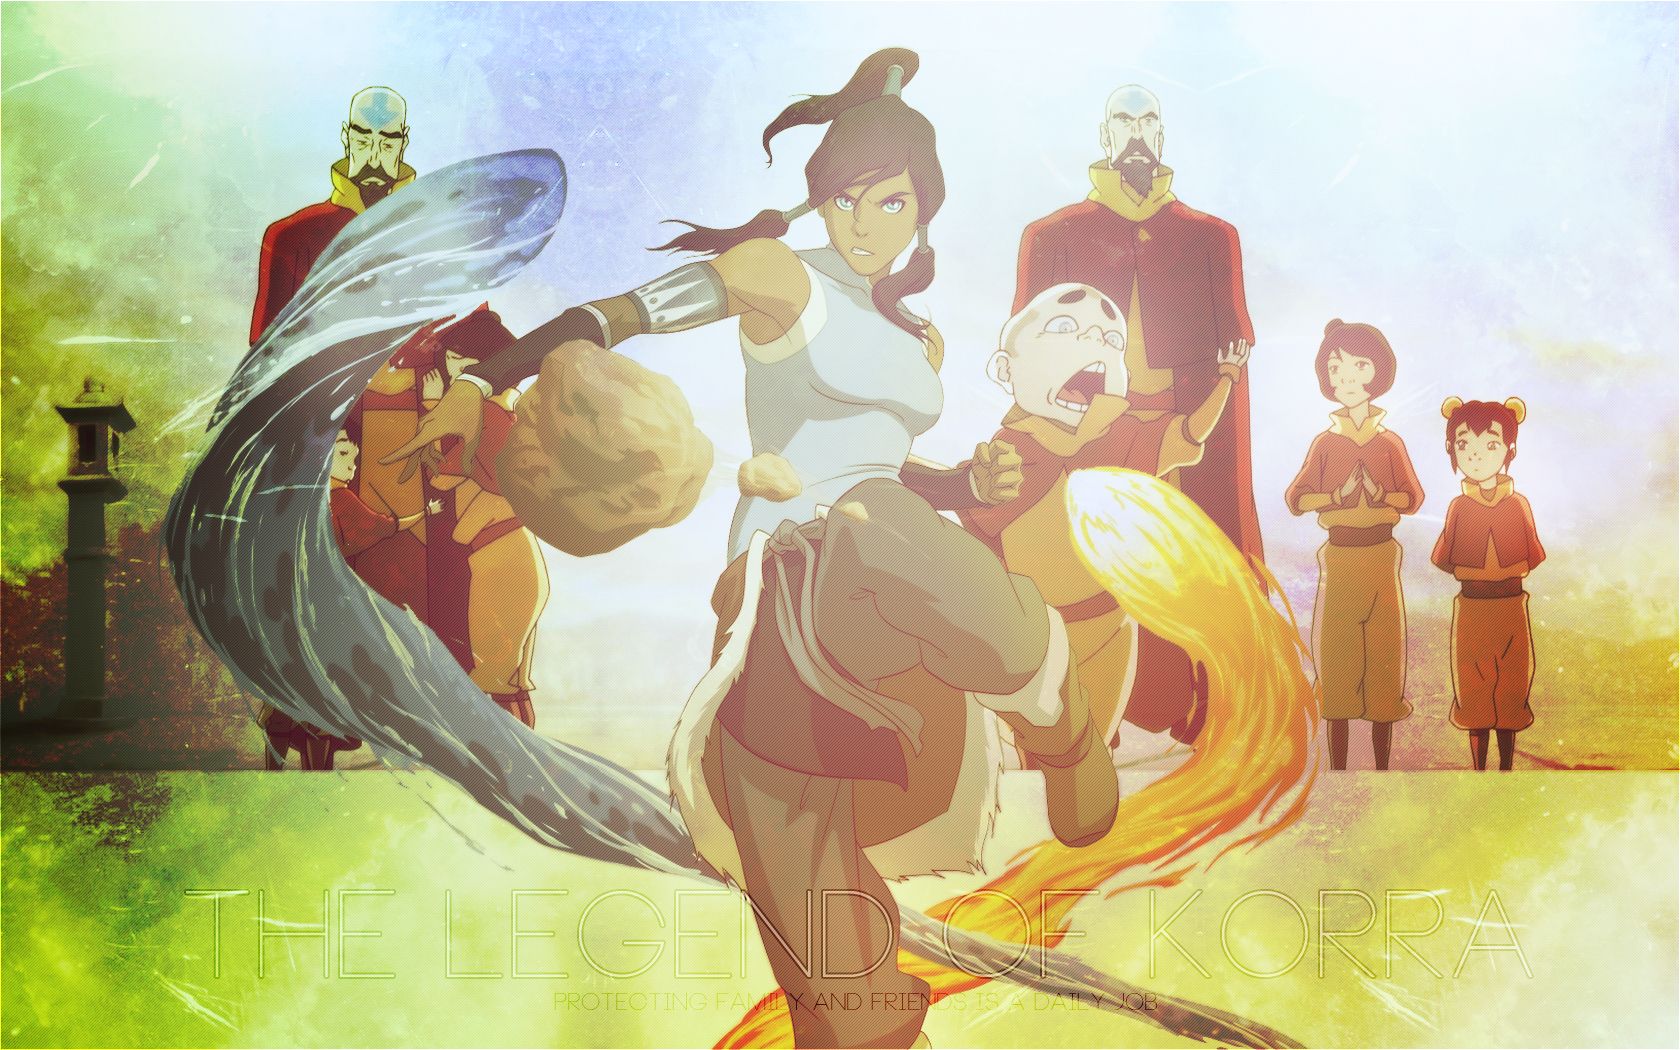 I made these wallpapers - Avatar The Legend of Korra Wallpaper